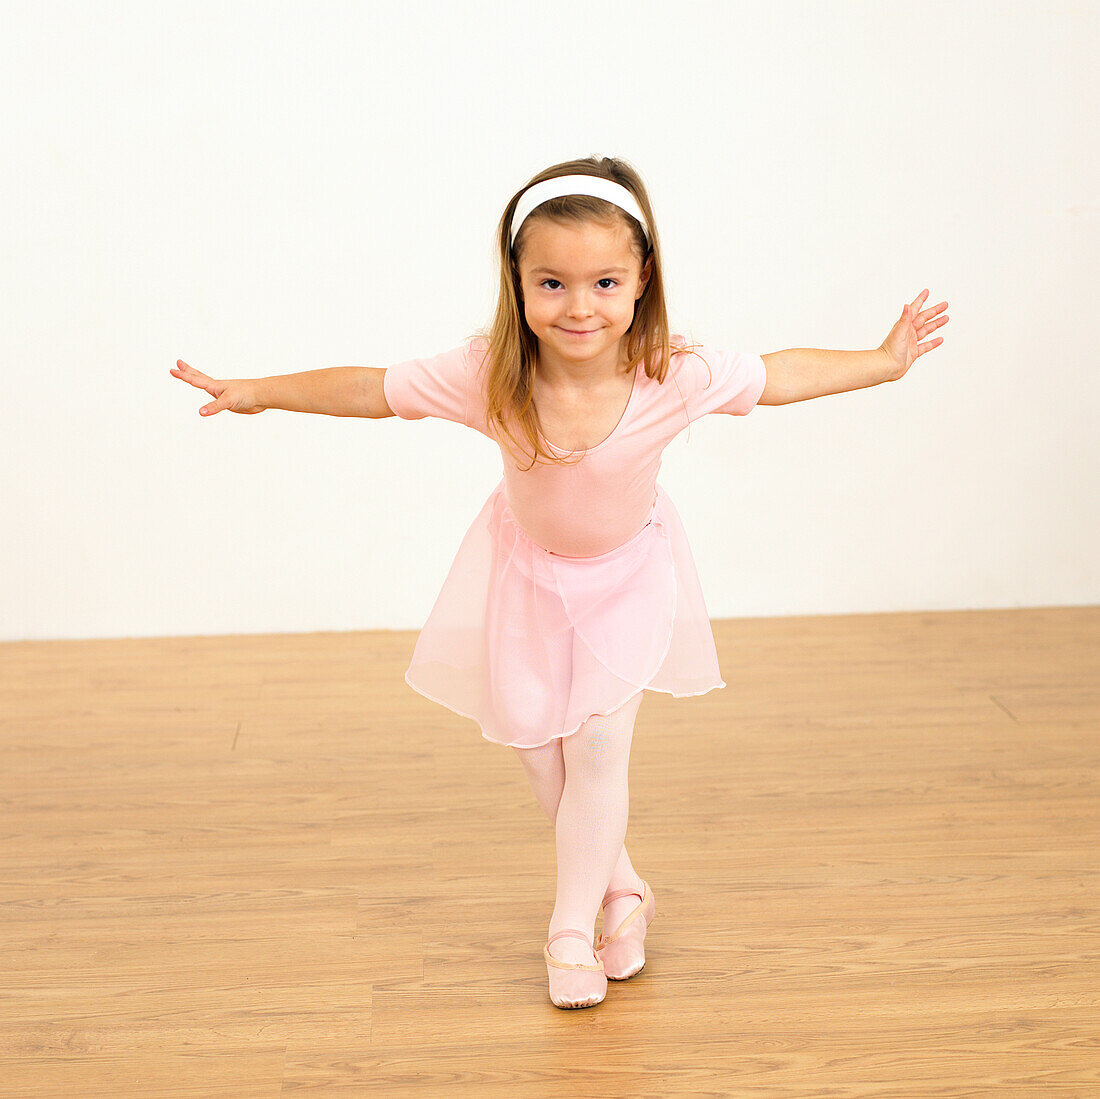 Girl in ballerina outfit with arms outstretched